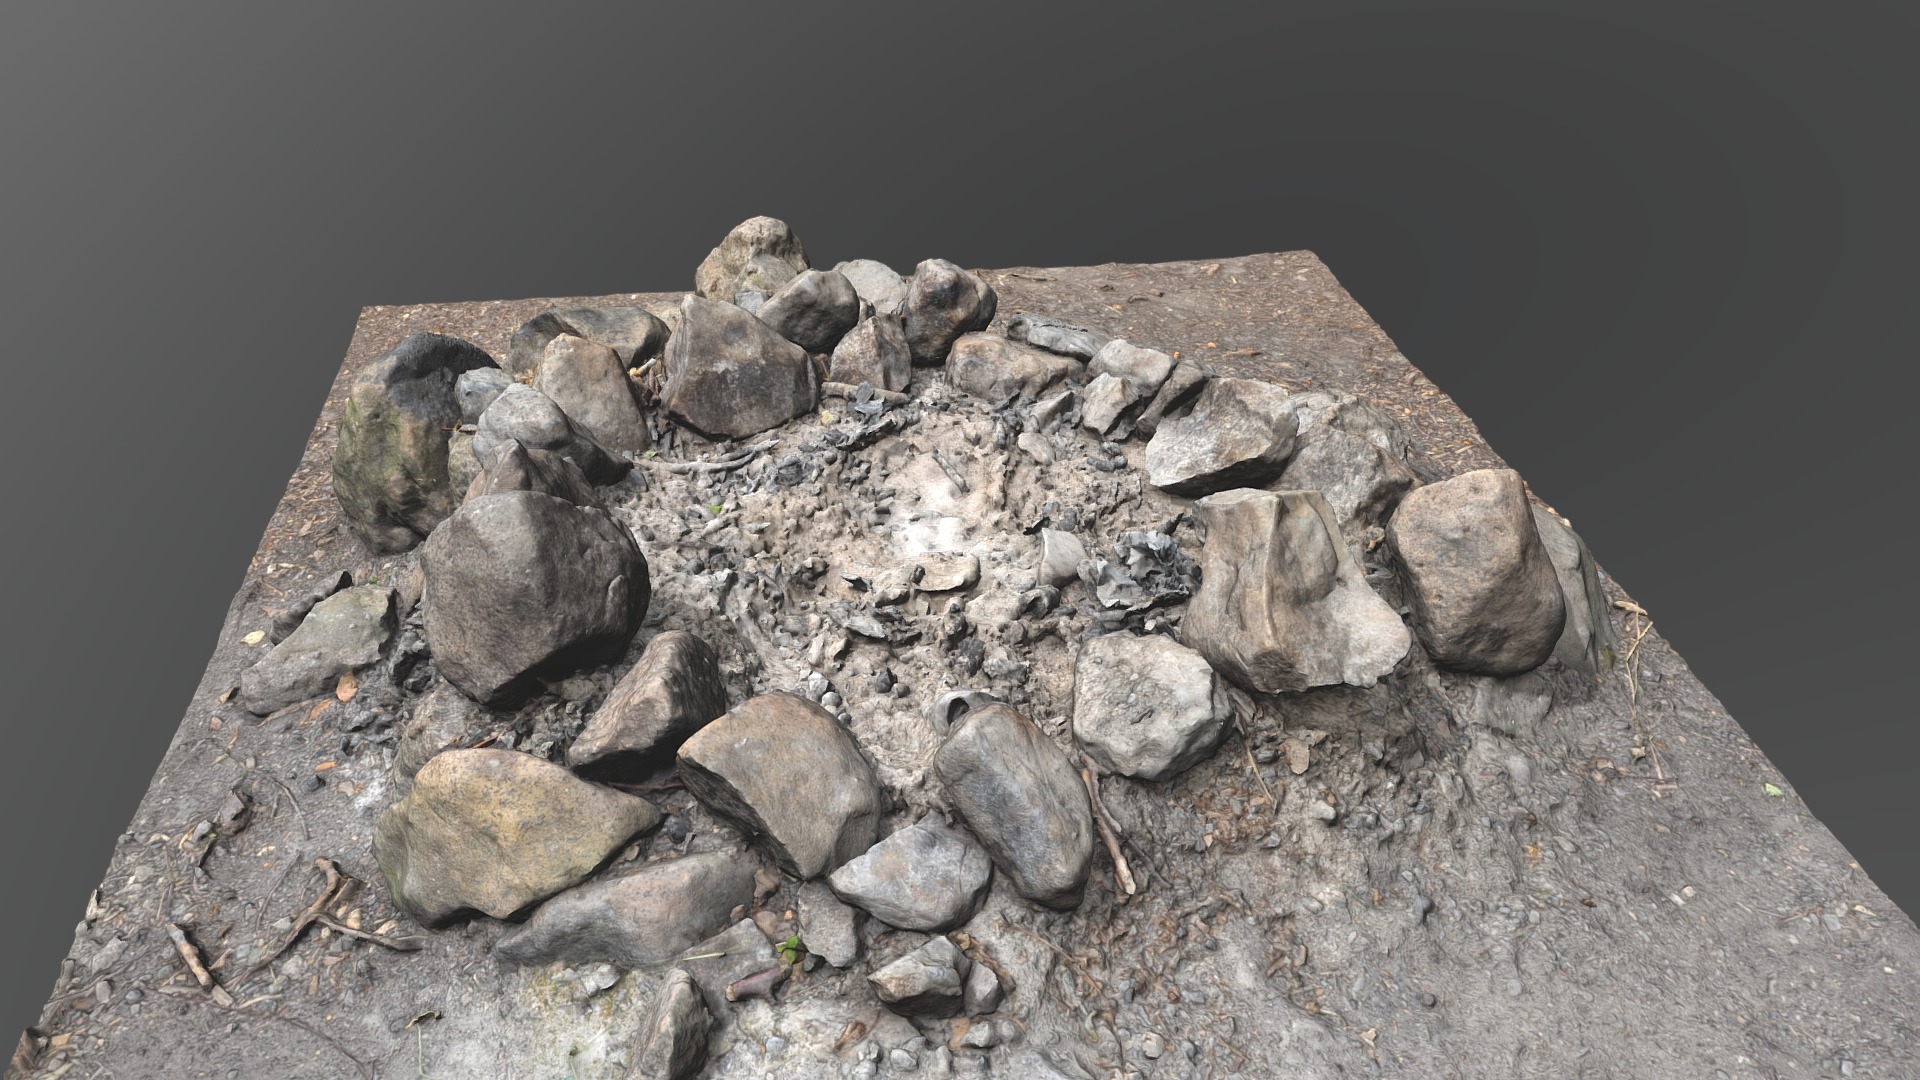 3D model Fireplace fire pit hole campfire made of stones - This is a 3D model of the Fireplace fire pit hole campfire made of stones. The 3D model is about a pile of rocks.